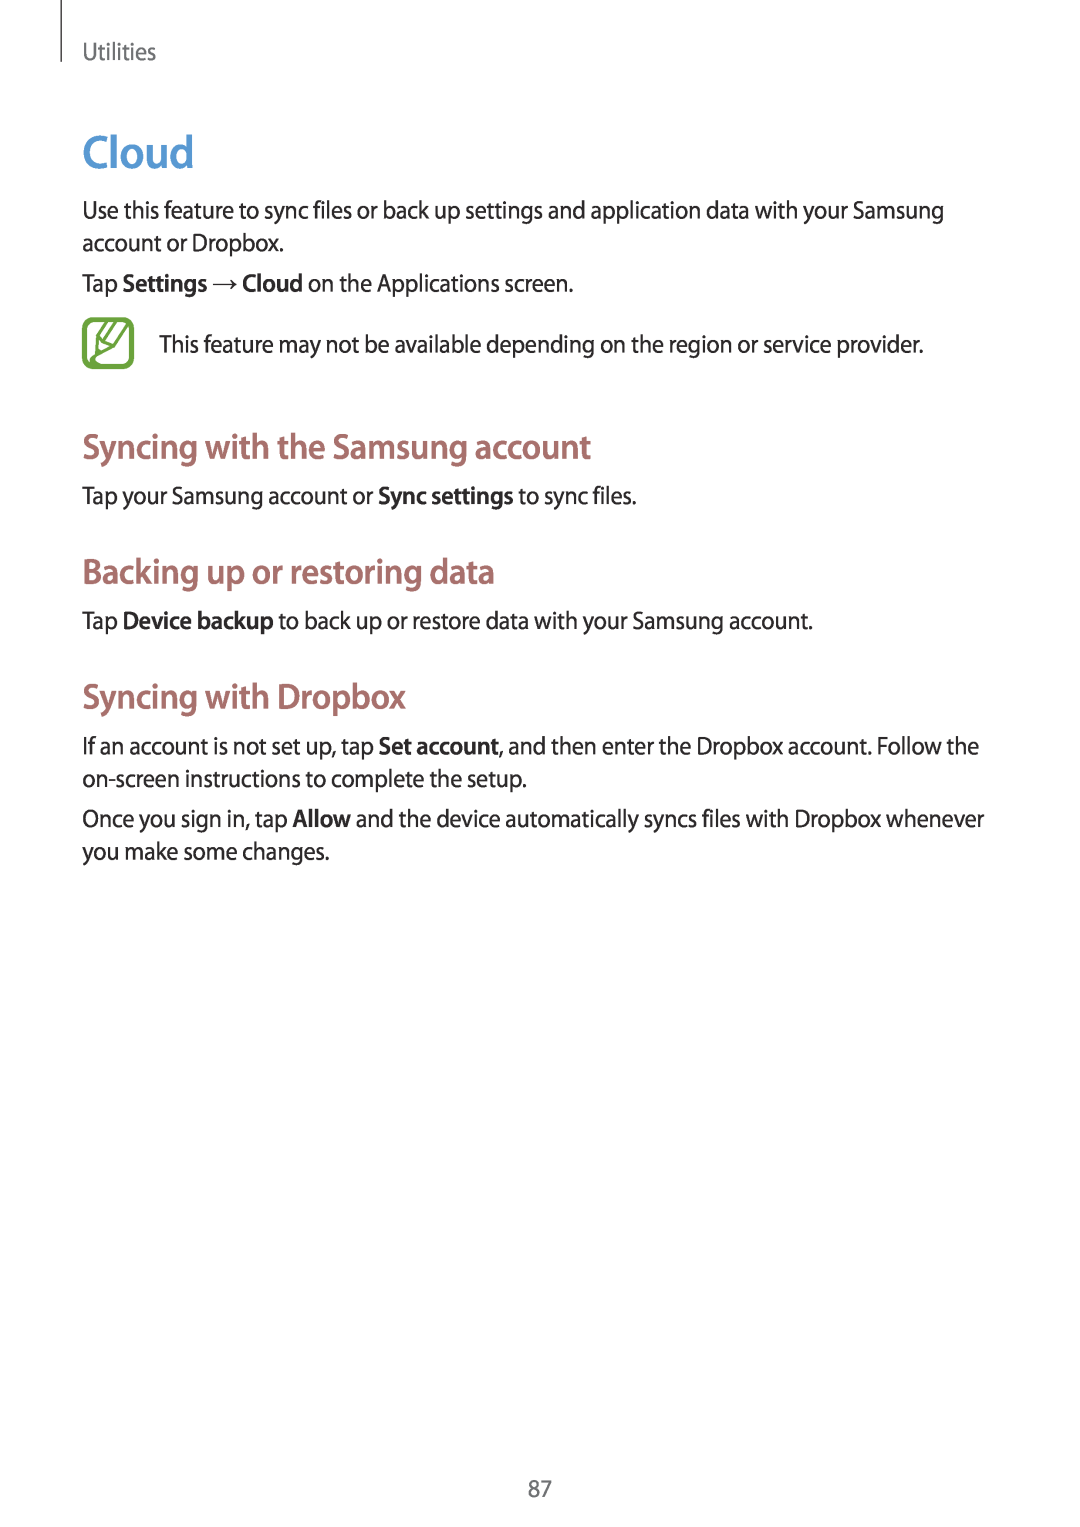 Samsung GT-I8730TAAATL manual Cloud, Syncing with the Samsung account, Backing up or restoring data, Syncing with Dropbox 